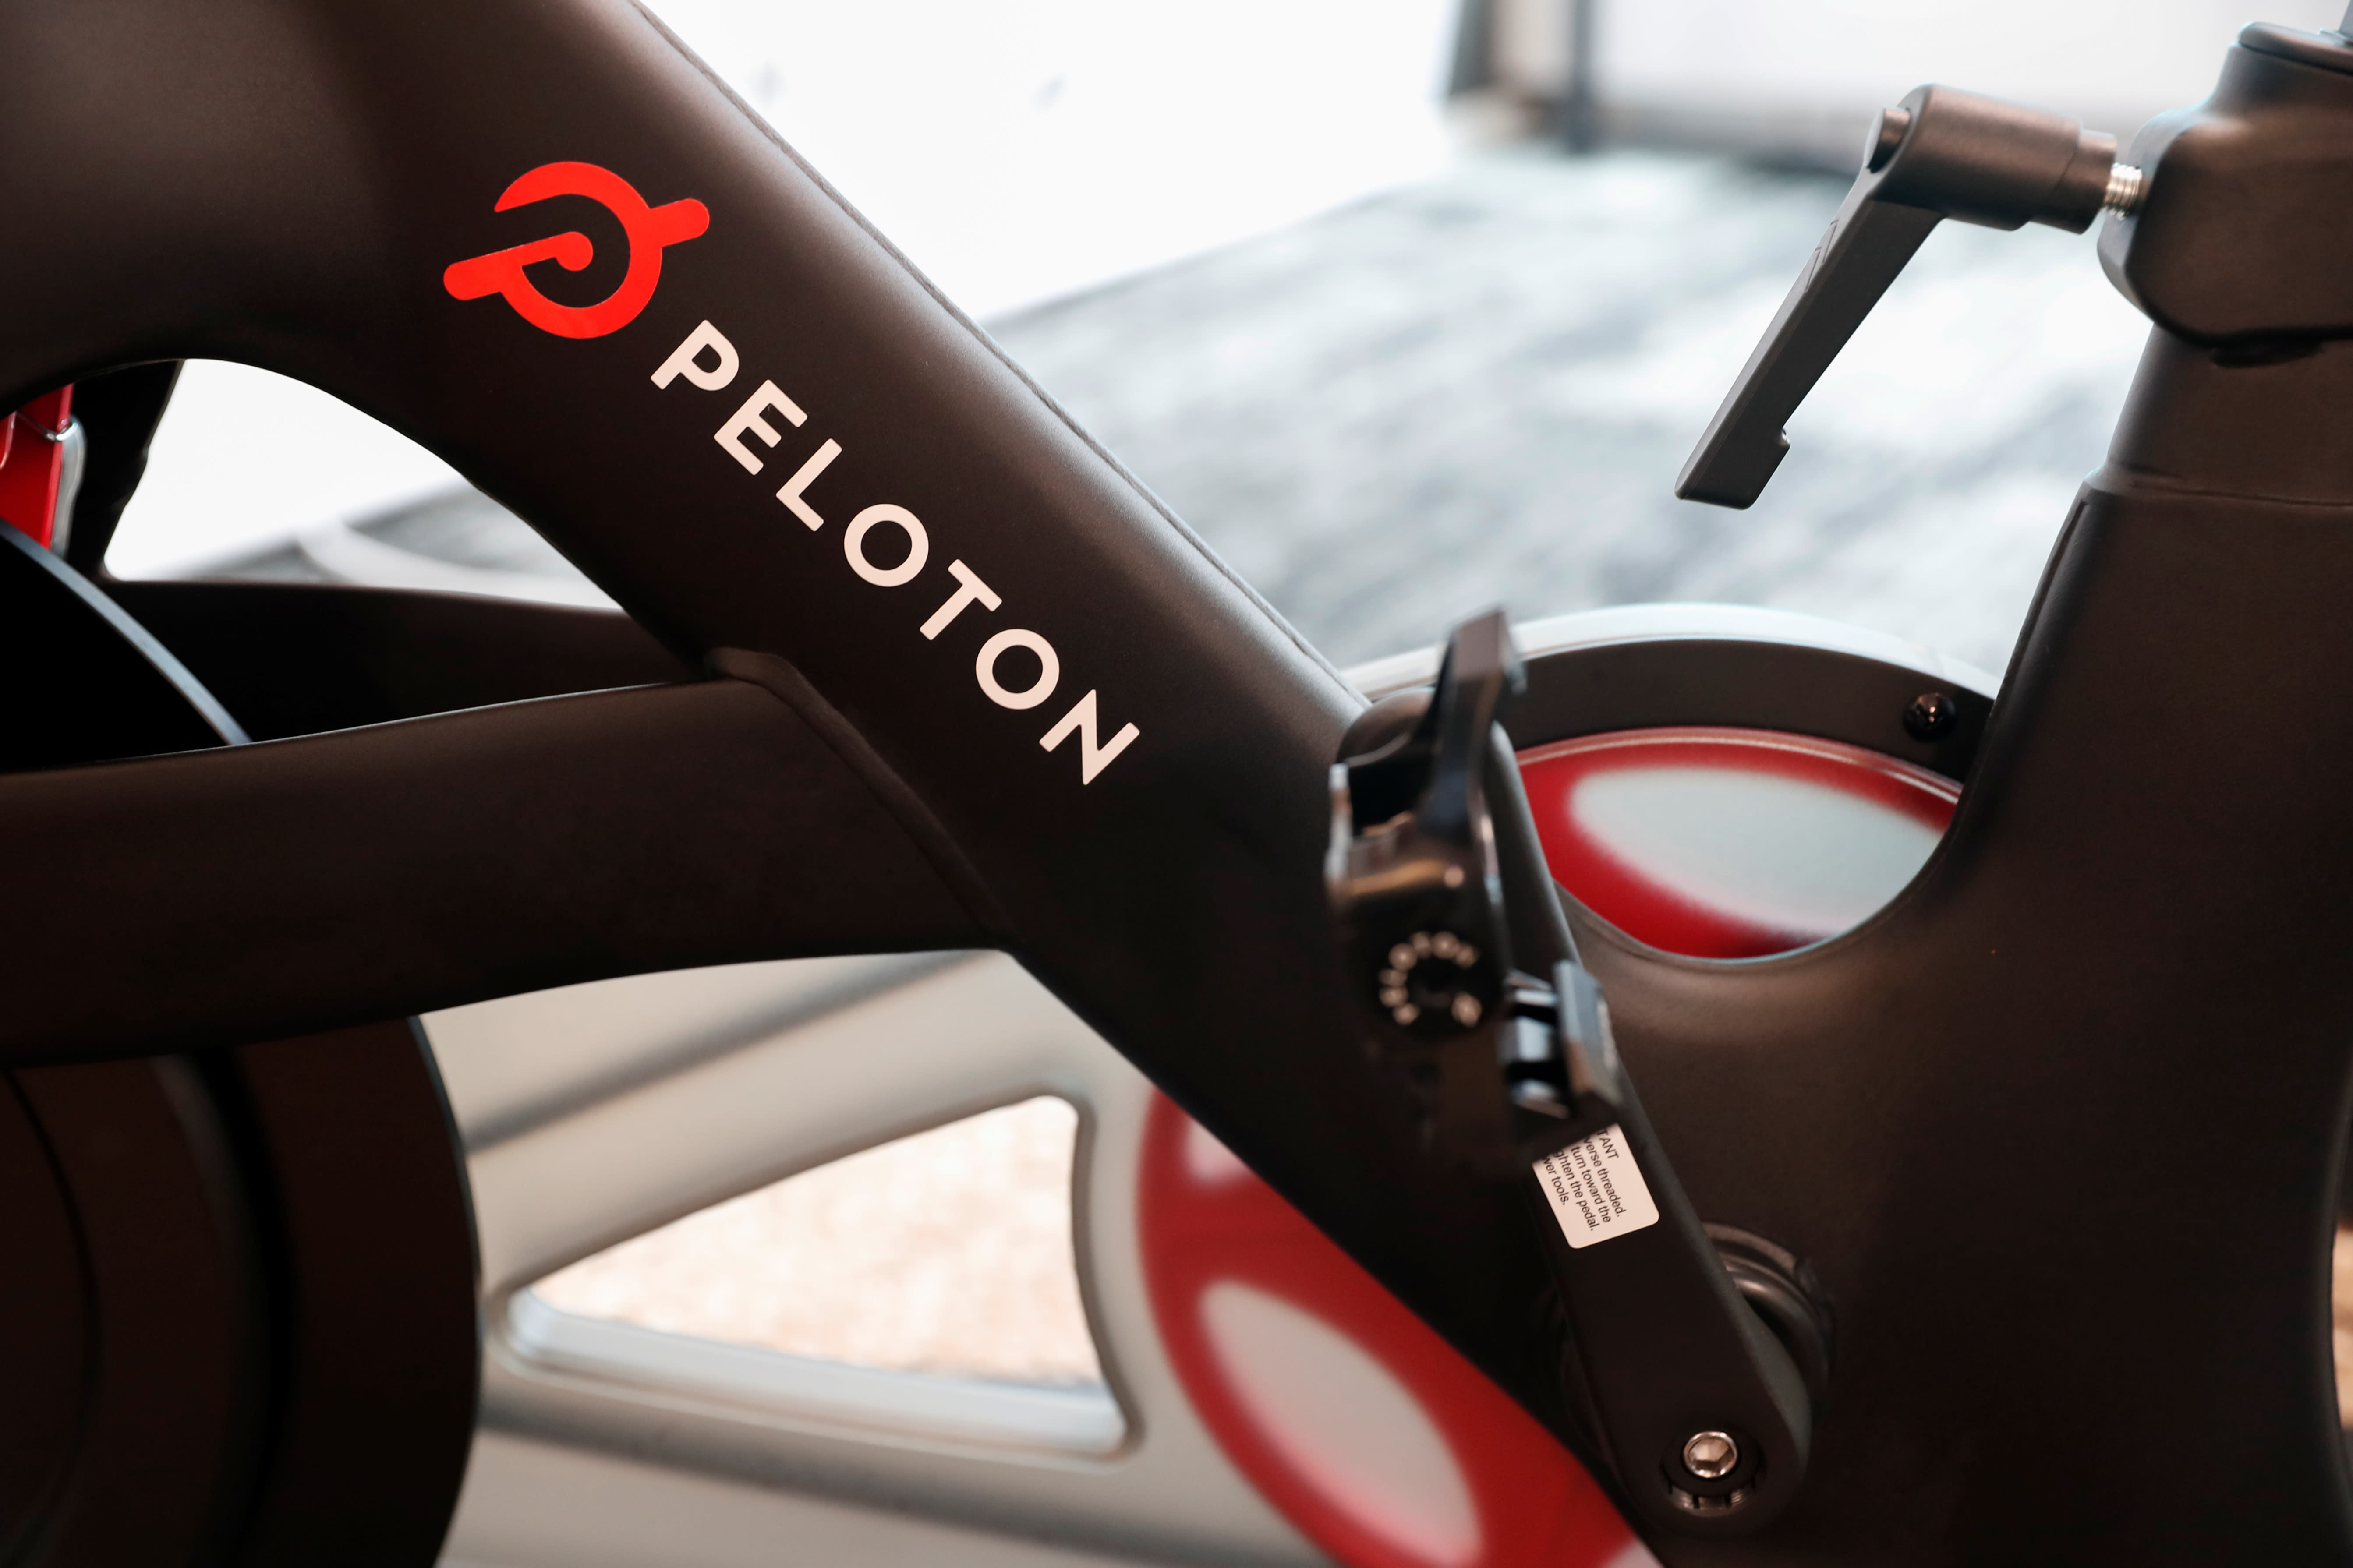 Peloton to introduce two new pieces of equipment: RPT